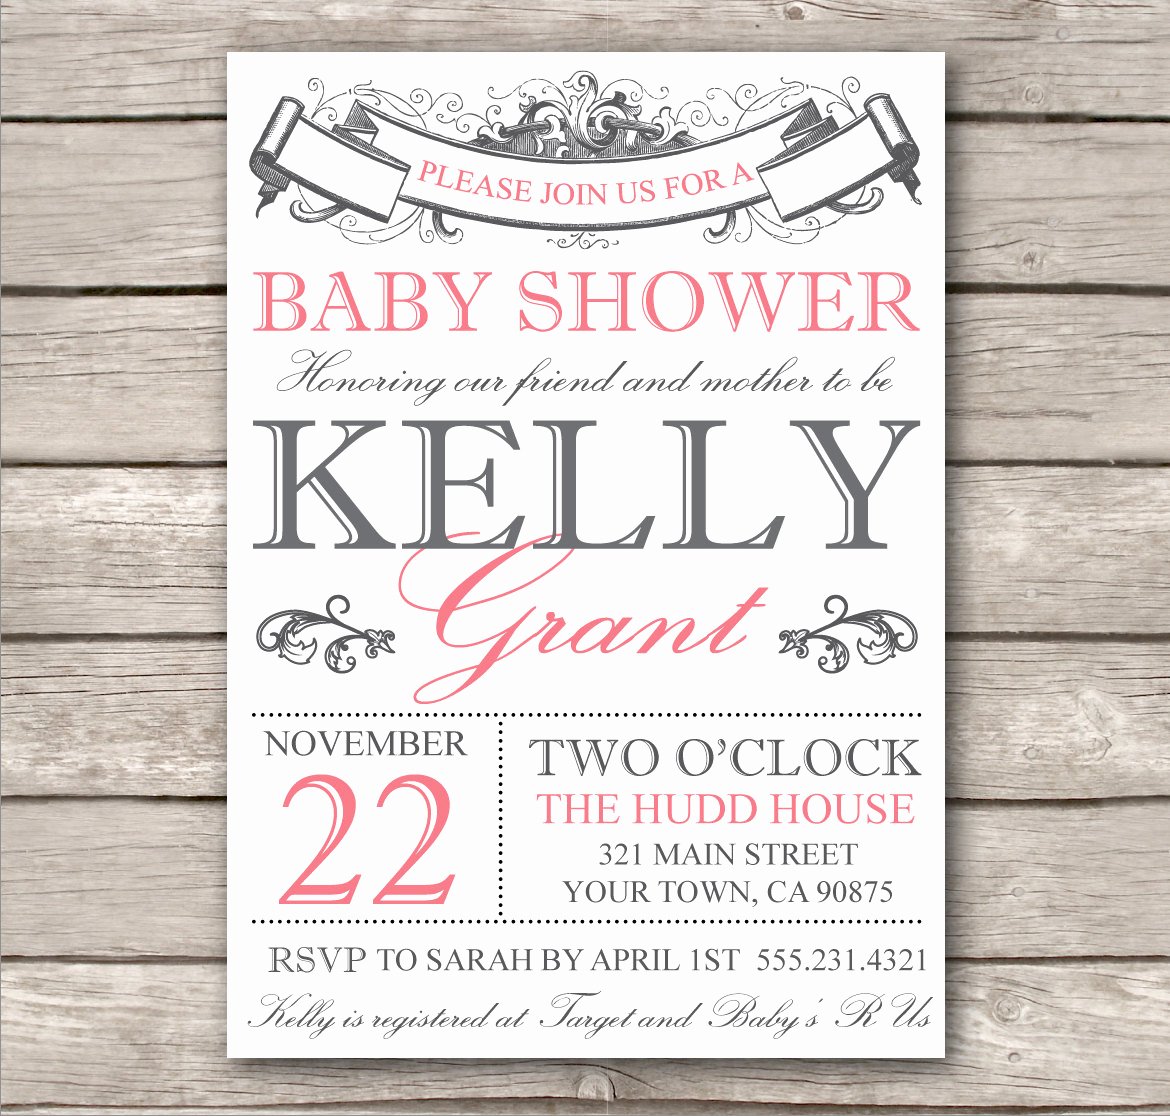 Printable Baby Shower Invitation Template Awesome Bridal Shower Invitation or Baby Shower Invitation by